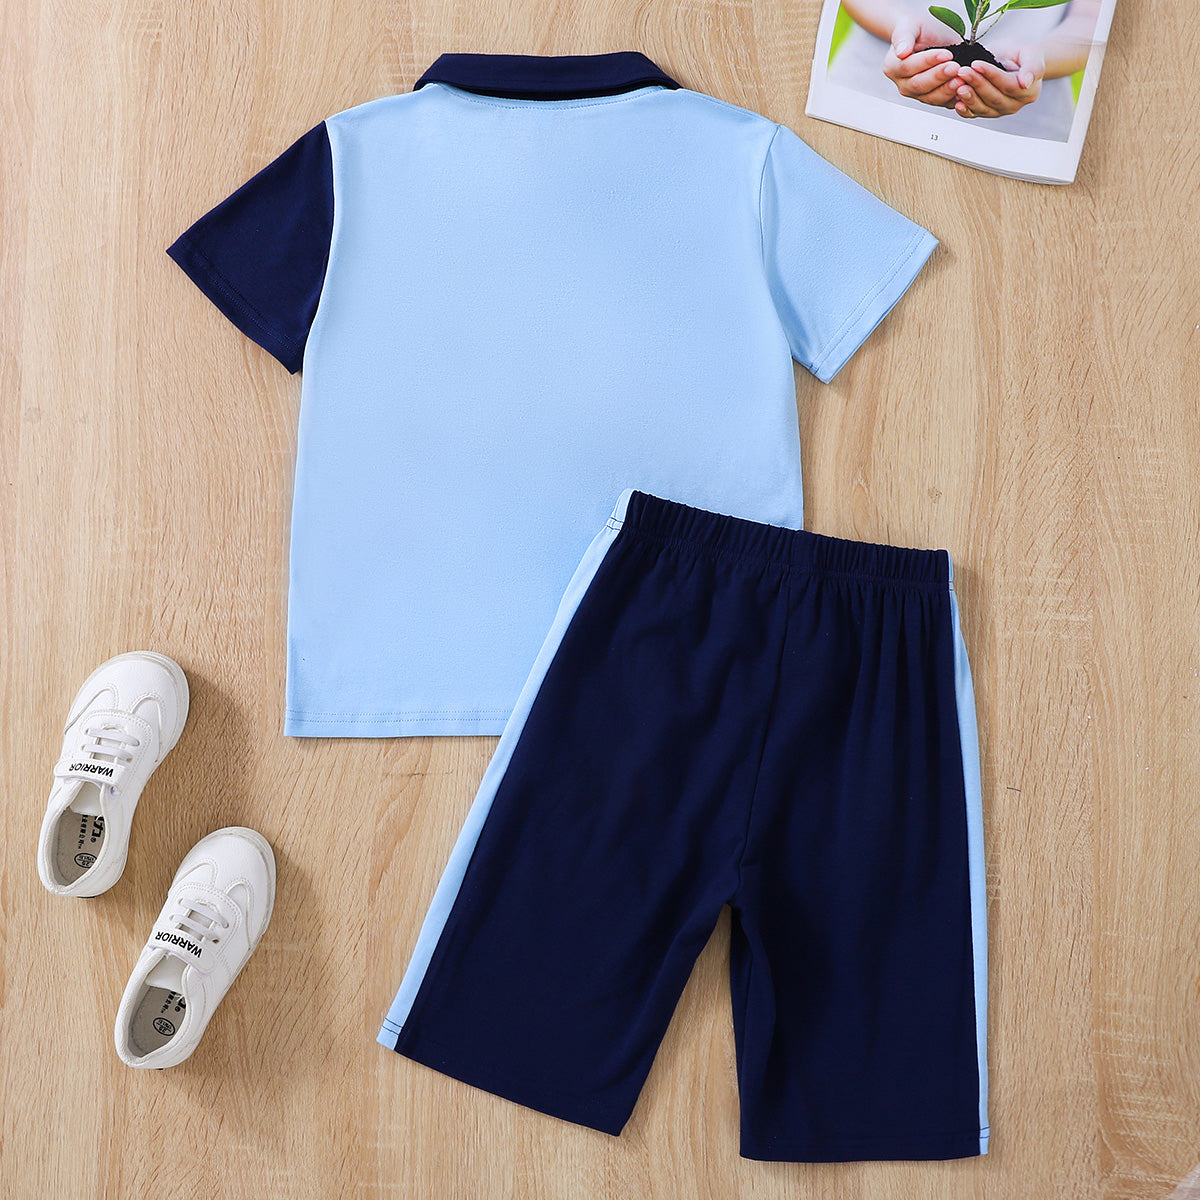 Uylee’s Boutique Kids Color Block Polo Shirt and Shorts Set